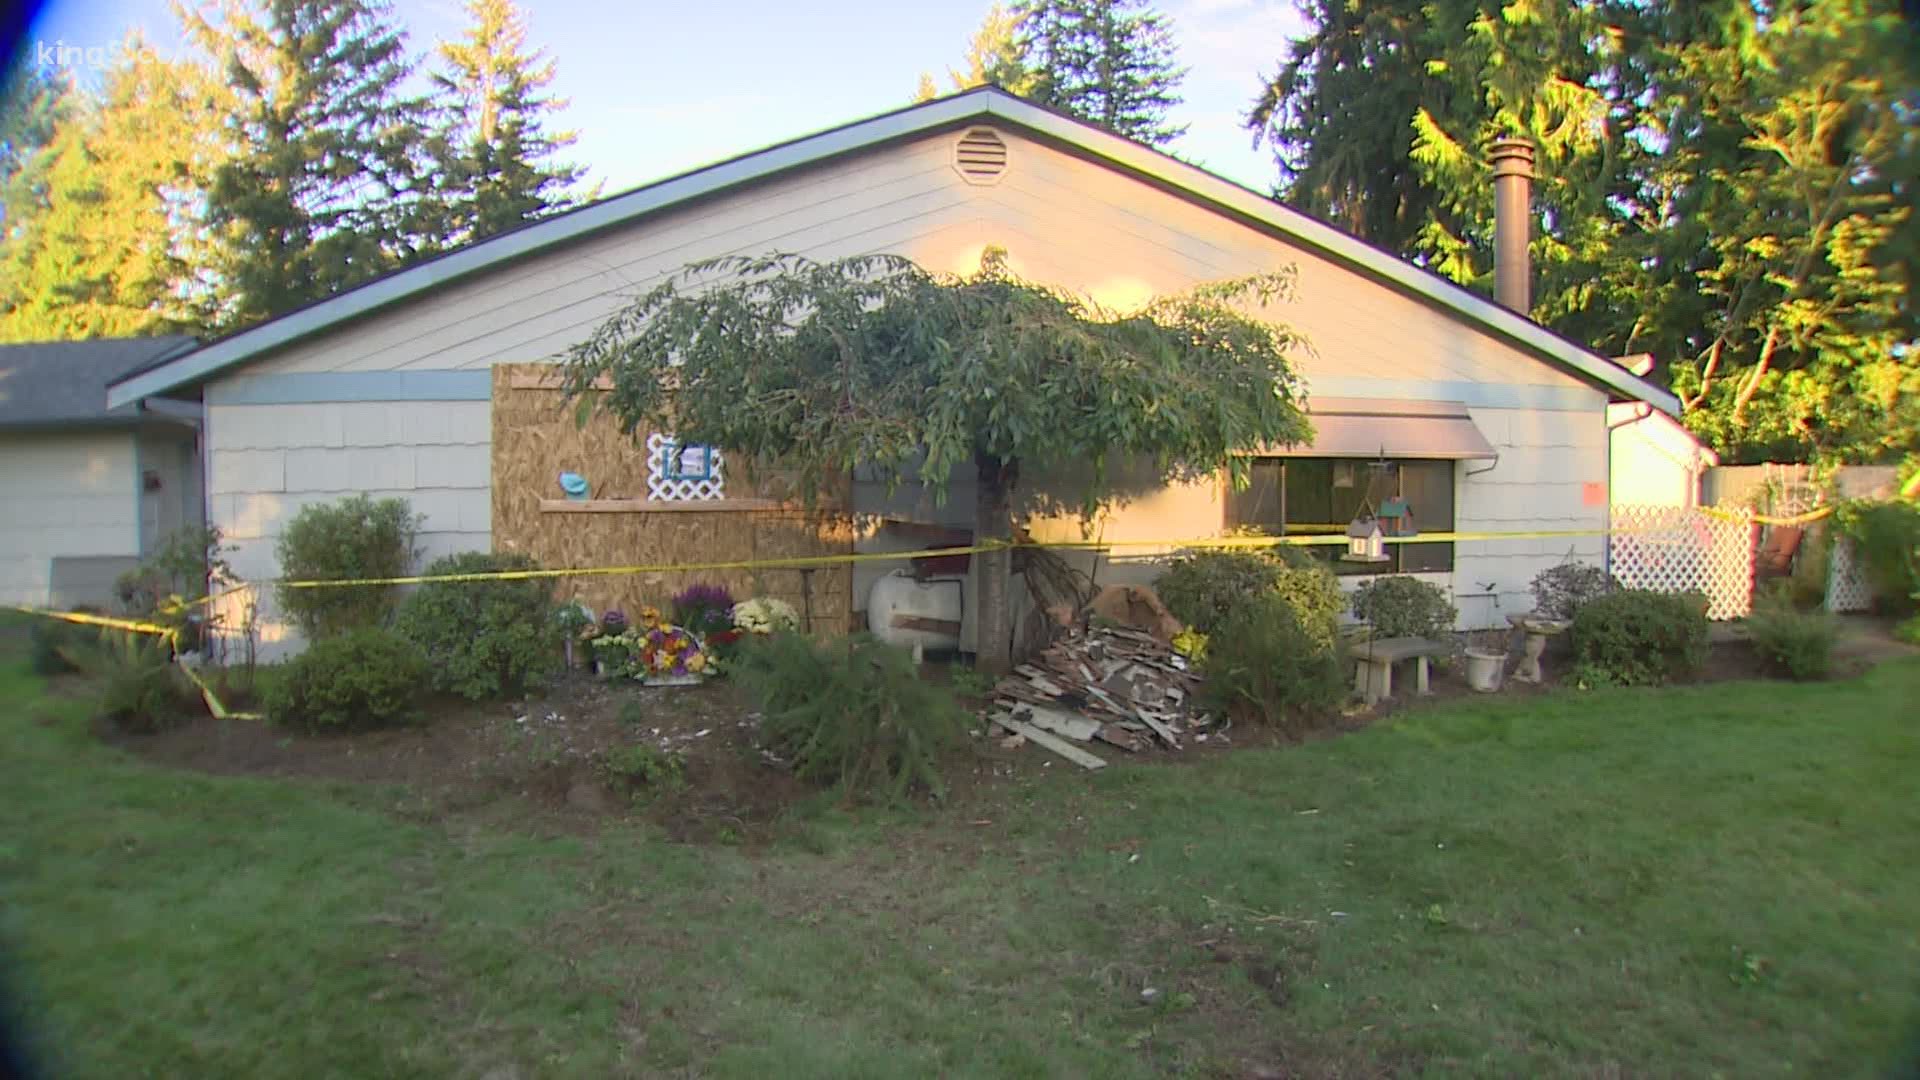 A 97-year-old woman was killed in her home when a suspected impaired driver smashed through her home.